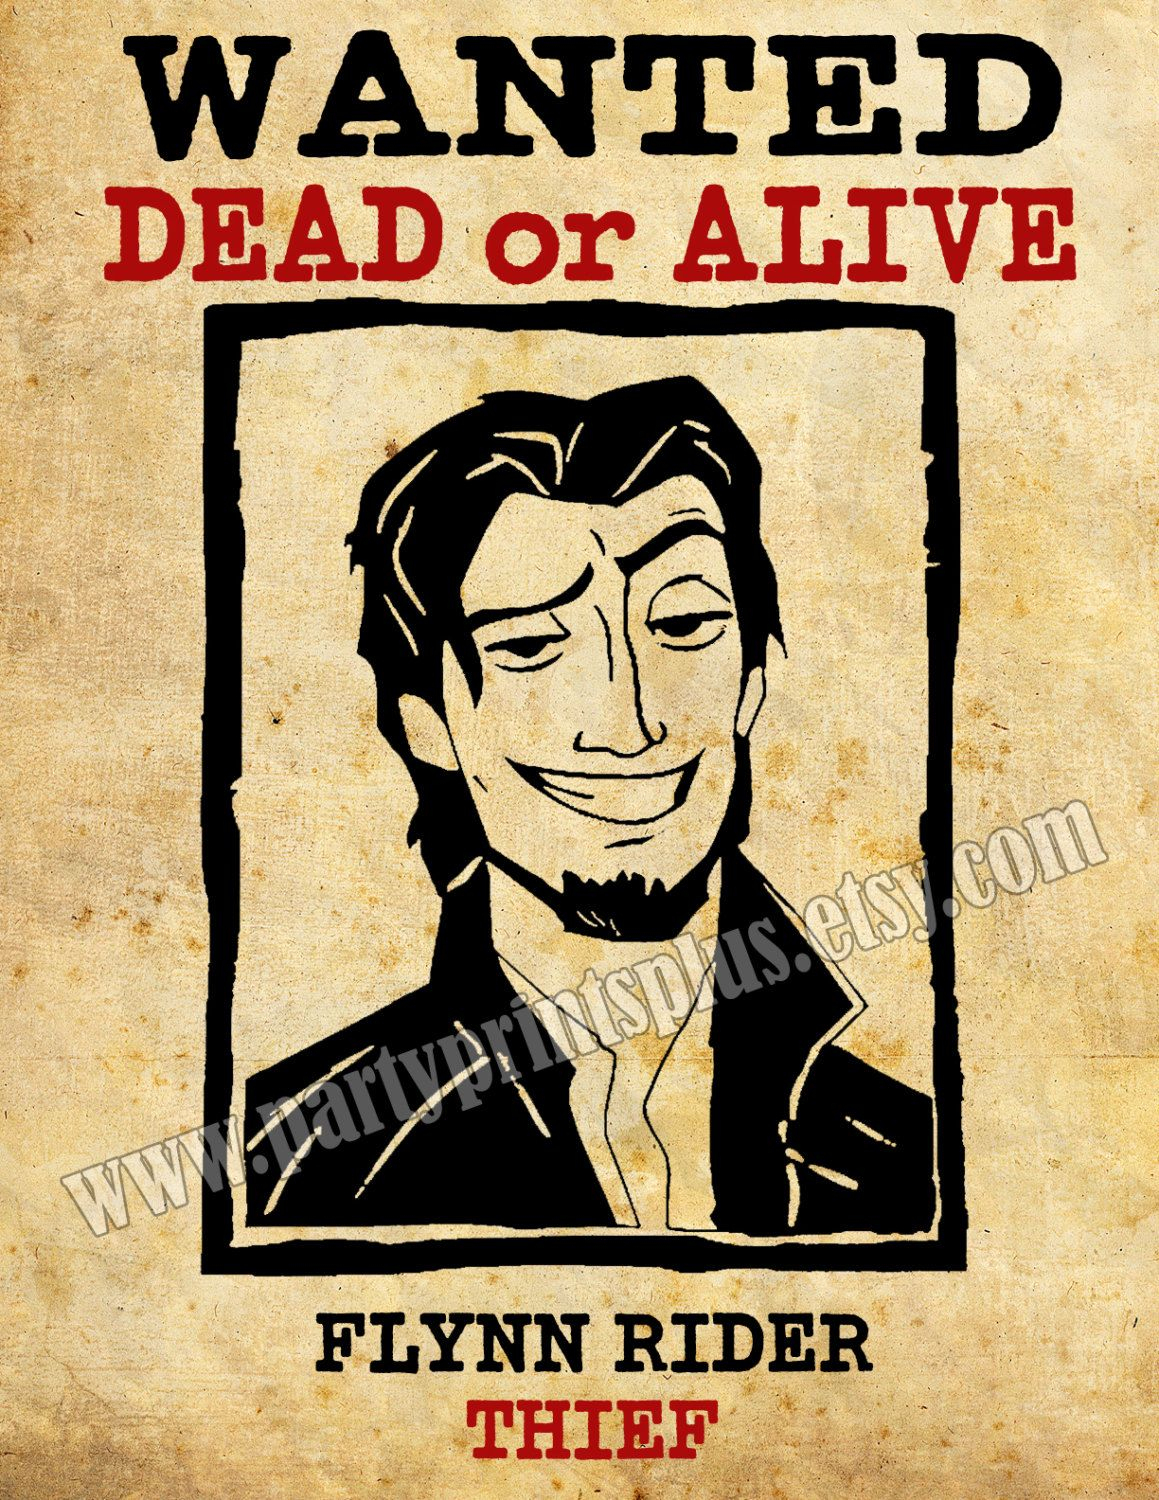 Flynn Rider Wanted Poster Decoration Forpartyprintsplus, $1.00 - Free Printable Flynn Rider Wanted Poster